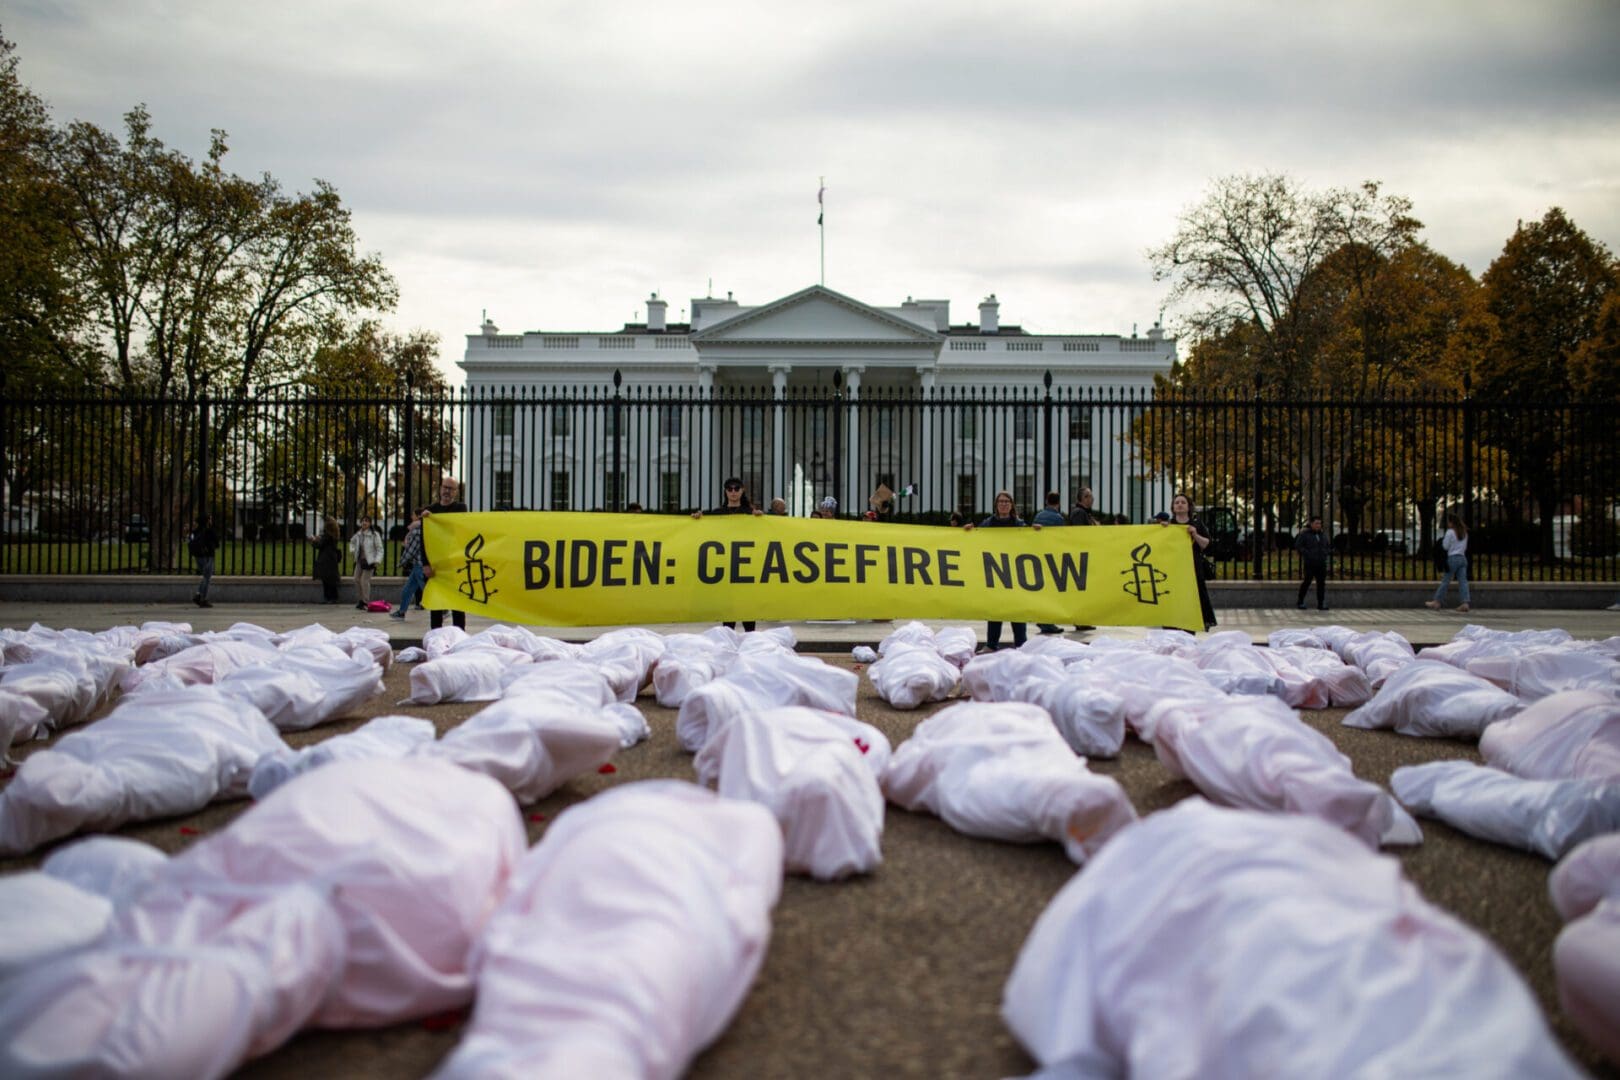 Amnesty International USA hosted a visual stunt to call on President Biden to demand a ceasefire now. The installation represented corpses of 300+ infants, children and adults in white body bags/sheets laid out in front of the White House. The stunt was conducted in partnership with Avaaz.